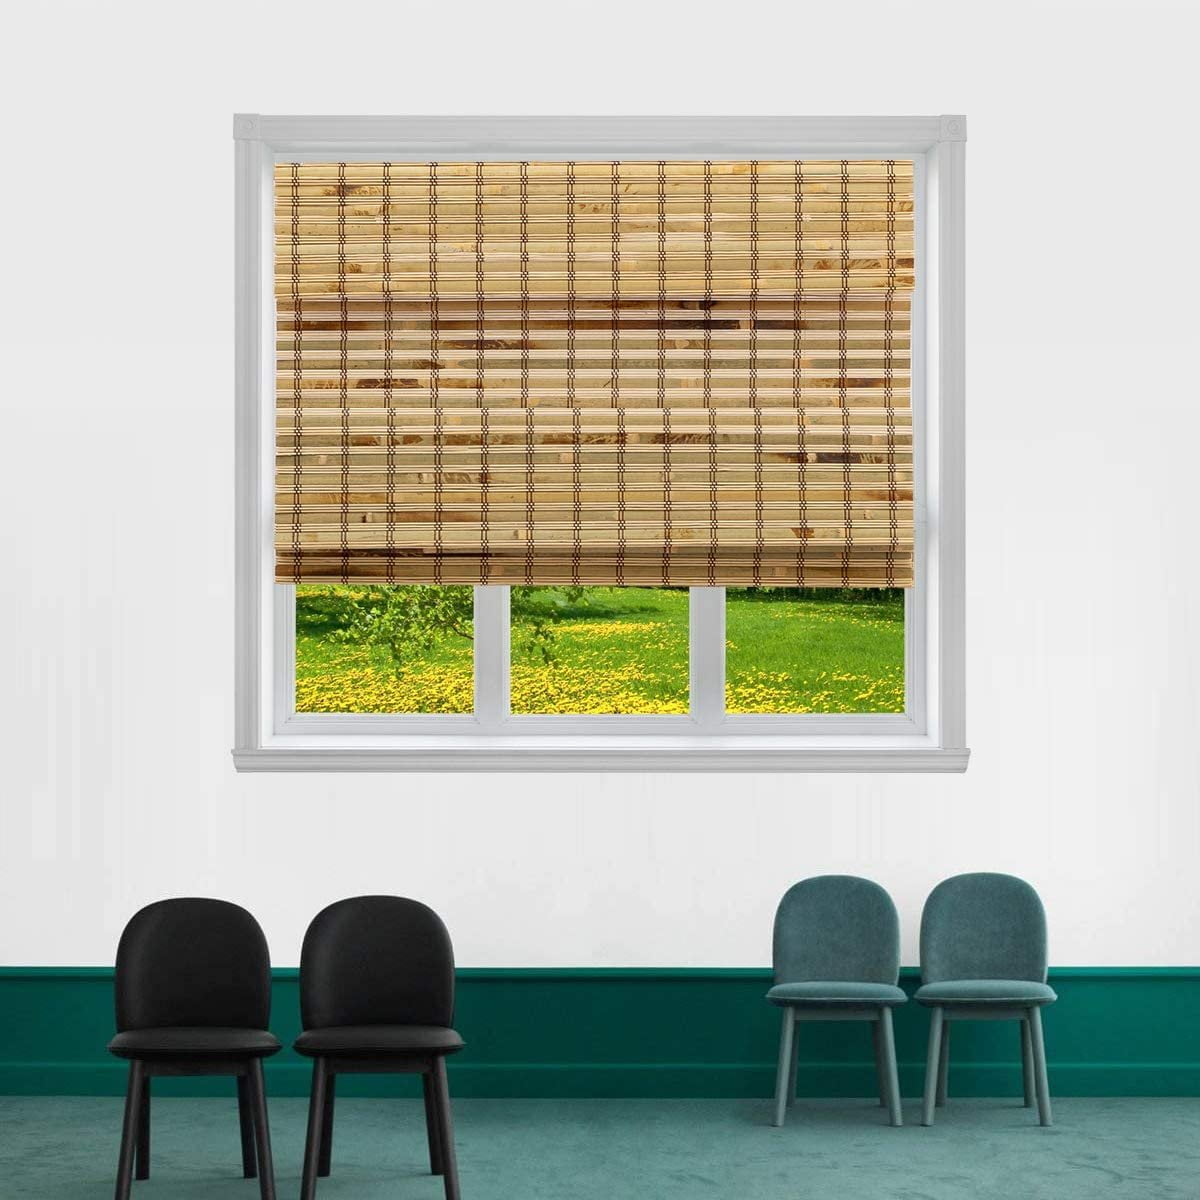 Roller blind Retro Bamboo Blinds,Natural Wood Window Shades Blinds,Bamboo Light Filtering Custom Roman Shades,Anti-UV Dustproof Decorative Curtain,for Indoor/Outdoor/Garden 90x120cm/36X47in 